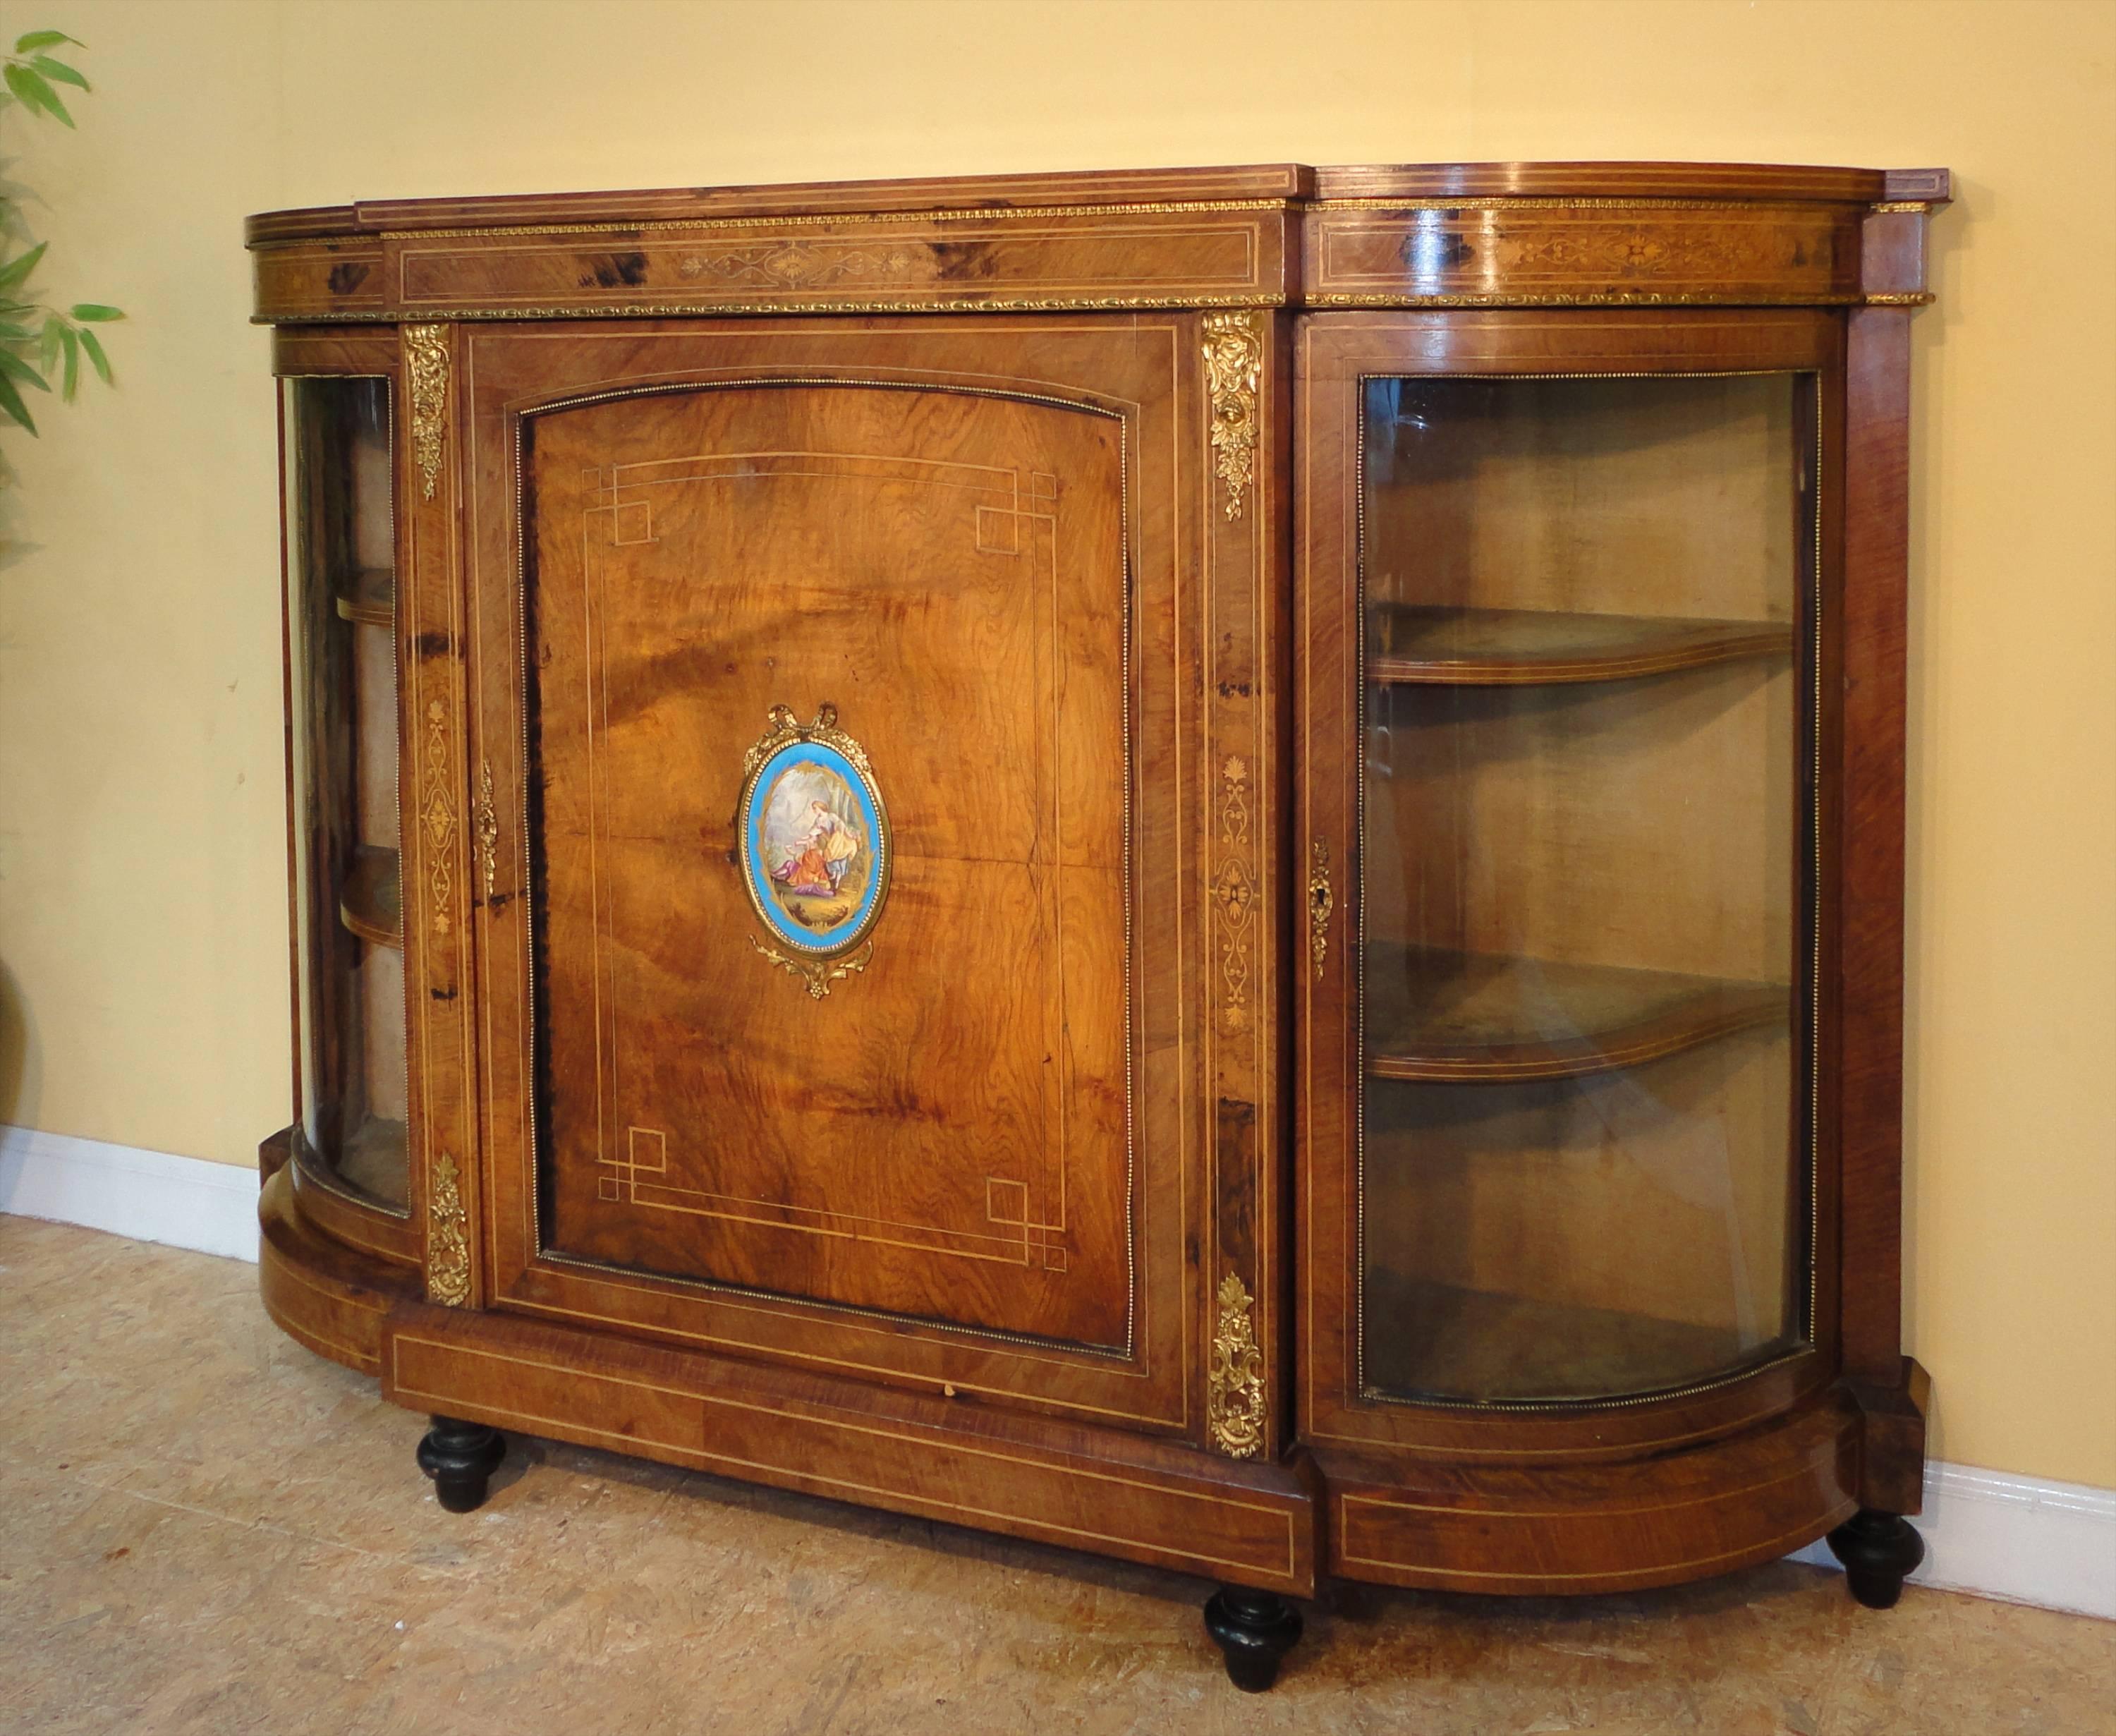 This is an attractive mid-Victorian ormolu-mounted, burr walnut and boxwood inlaid credenza dating to circa 1870. It has a breakfront top with a delicately inlaid and ormolu edged frieze, the central panelled cupboard door is centred with a